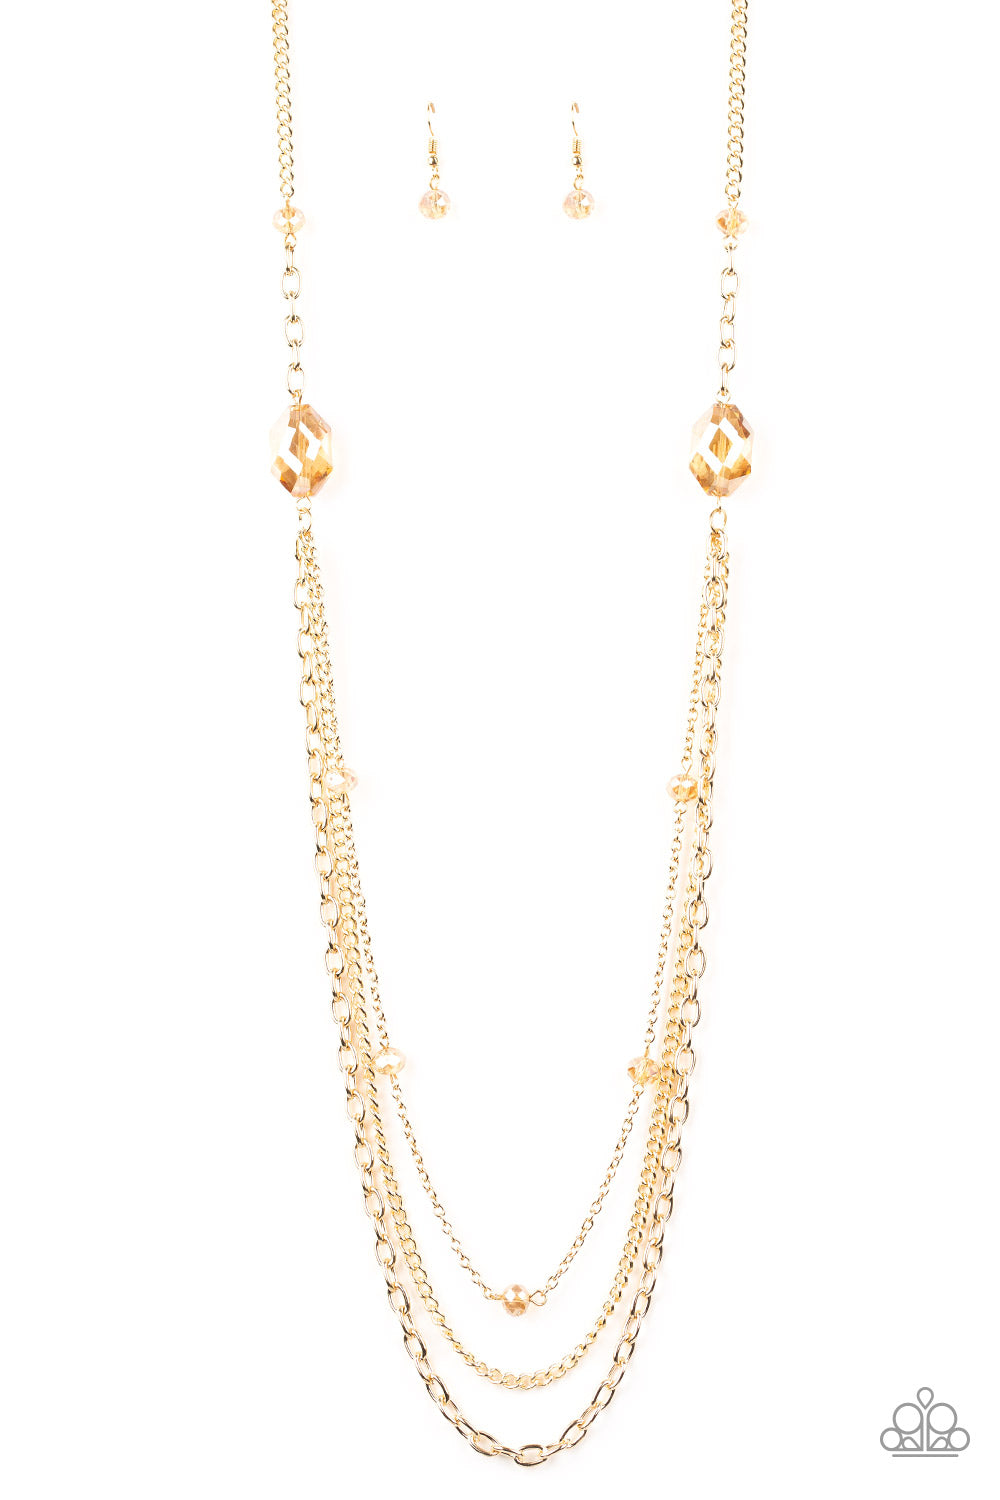 Dare To Dazzle - Gold Item #N635 Infused with golden crystal-like beads, a pair of golden gems gives way to layers of mismatched gold chains for a dazzling look. Features an adjustable clasp closure. All Paparazzi Accessories are lead free and nickel free!  Sold as one individual necklace. Includes one pair of matching earrings.